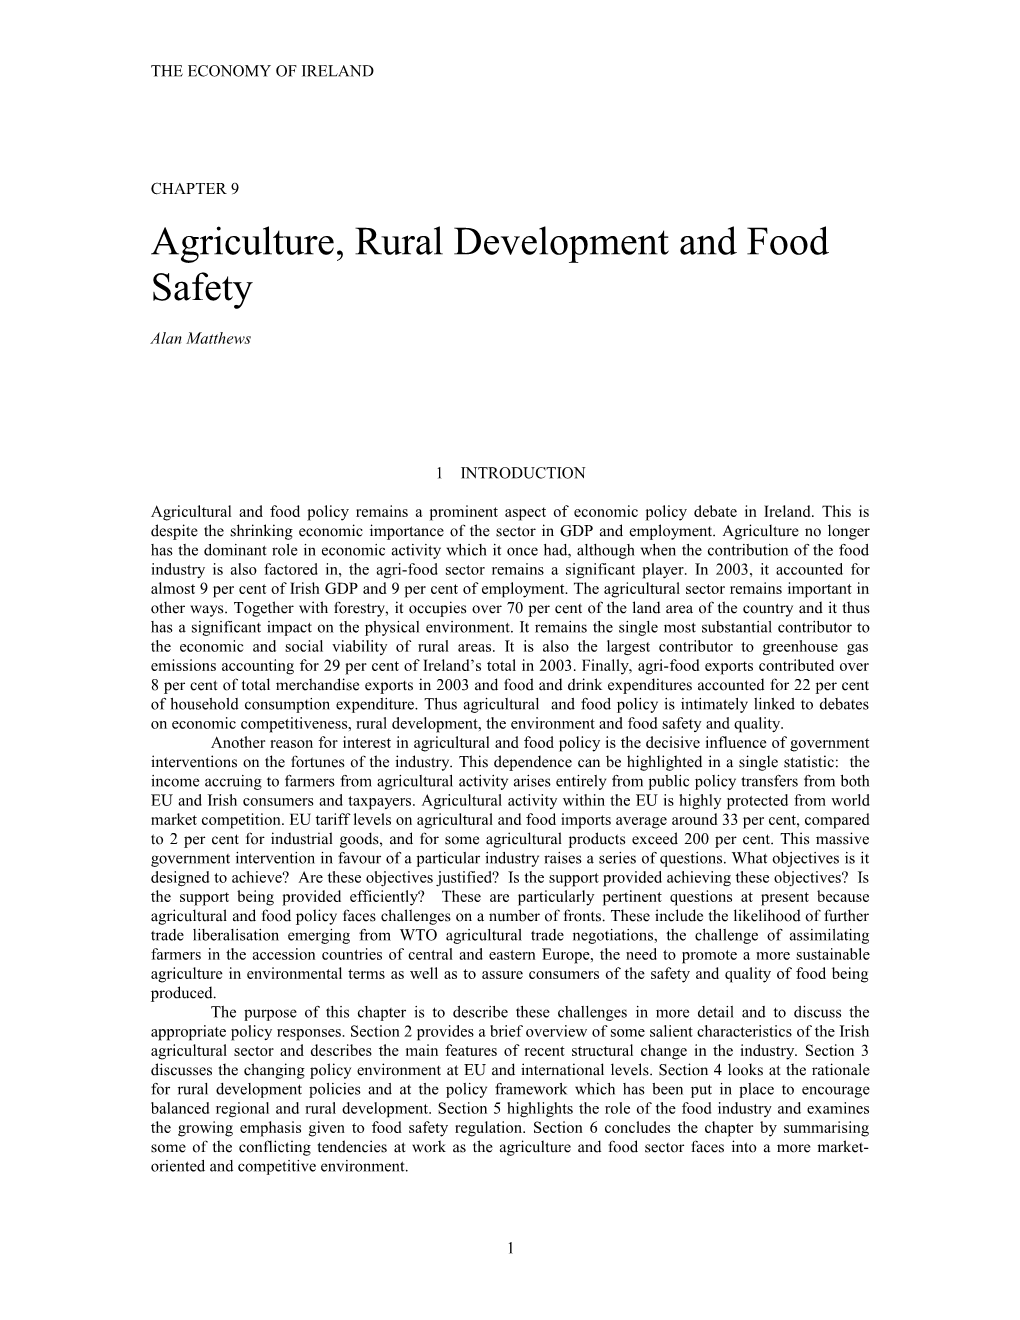 Agriculture, Rural Development and Food Safety